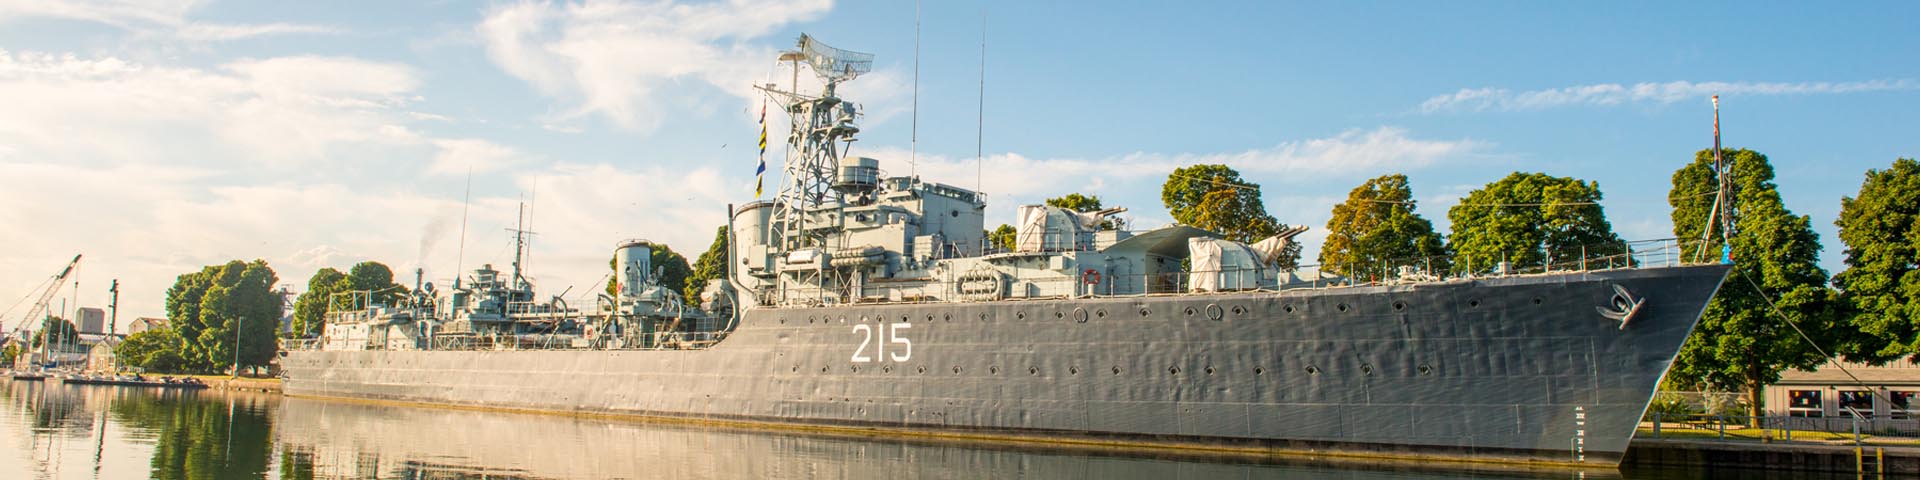 A starboard side view, HMCS Haida National Historic Site.